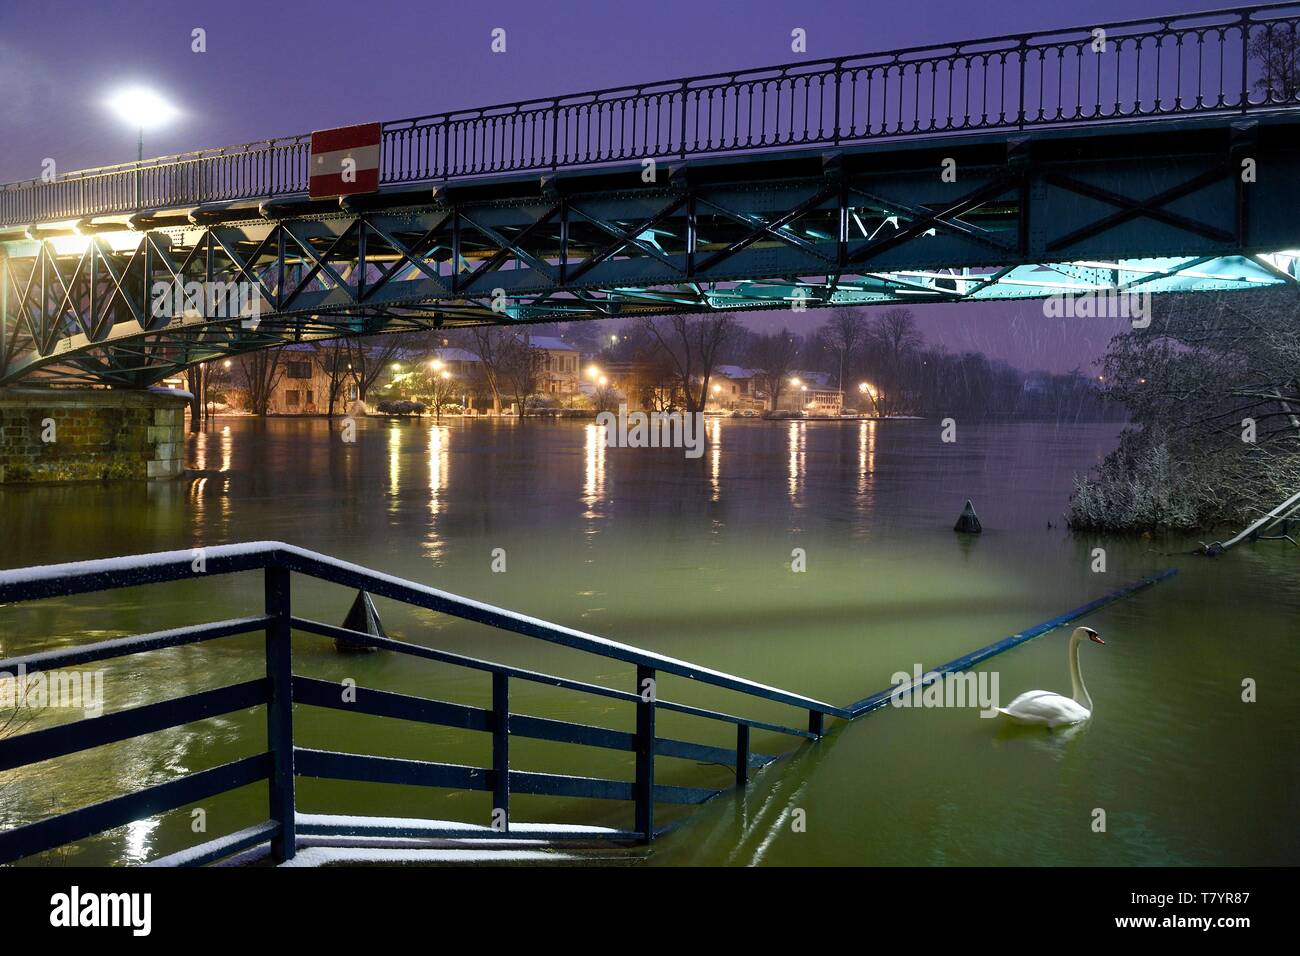 France, Val de Marne, Bry sur Marne, the footbridge made by Gustave Eiffel between Bry sur Marne and Le Perreux sur Marne in the background, the banks of the Marne flooded Stock Photo